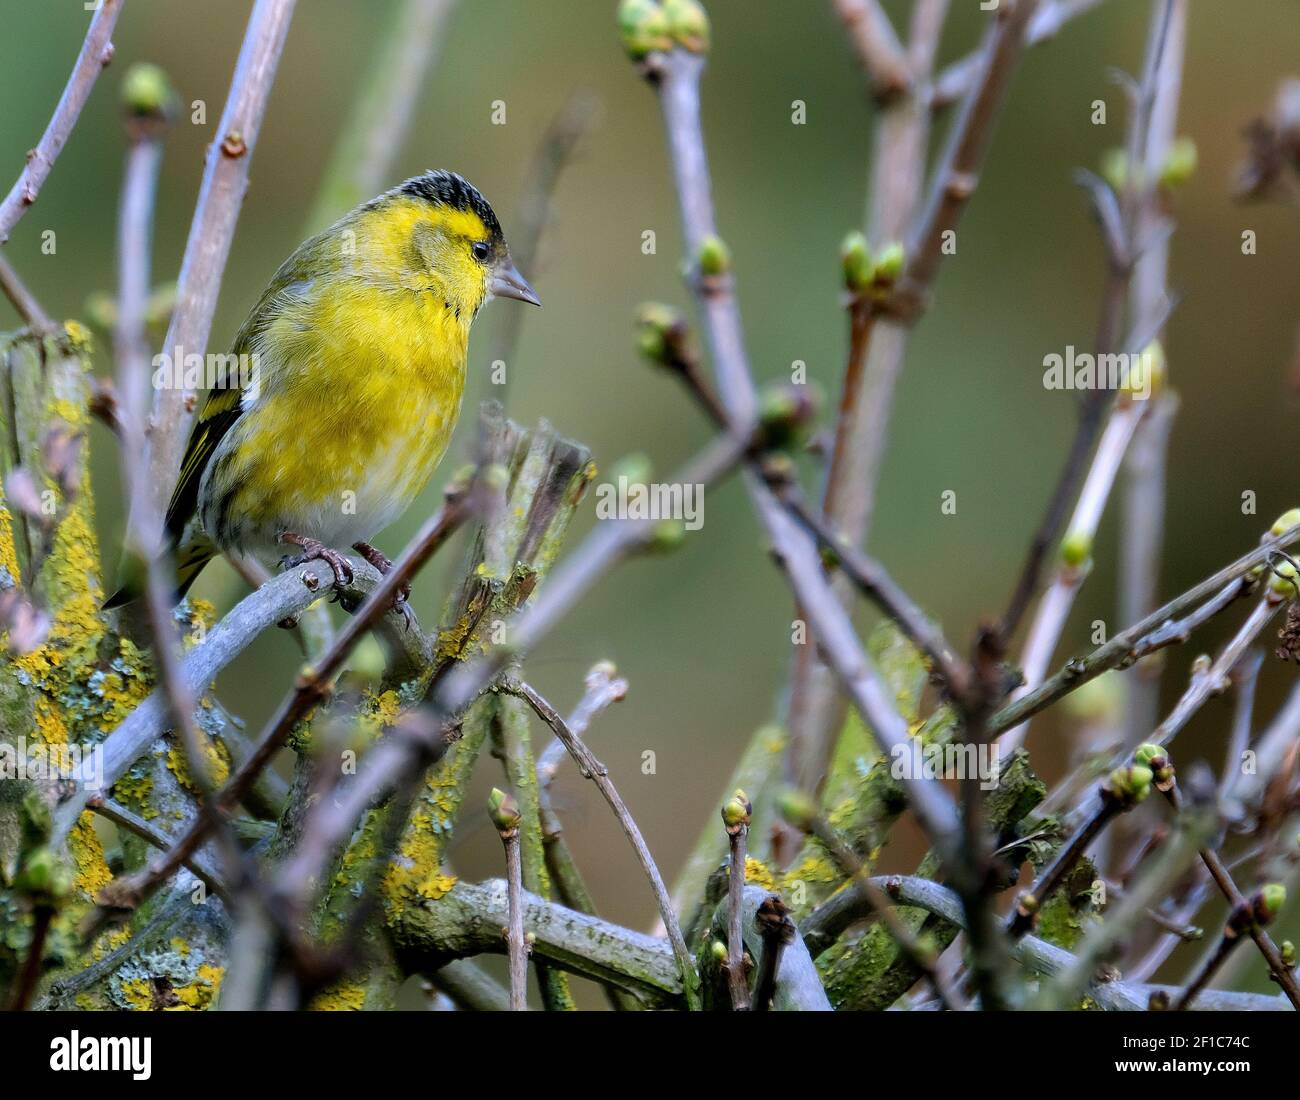 The Eurasian siskin is a small passerine bird in the finch family Fringillidae. It is also called the European siskin, common siskin or just siskin. Stock Photo